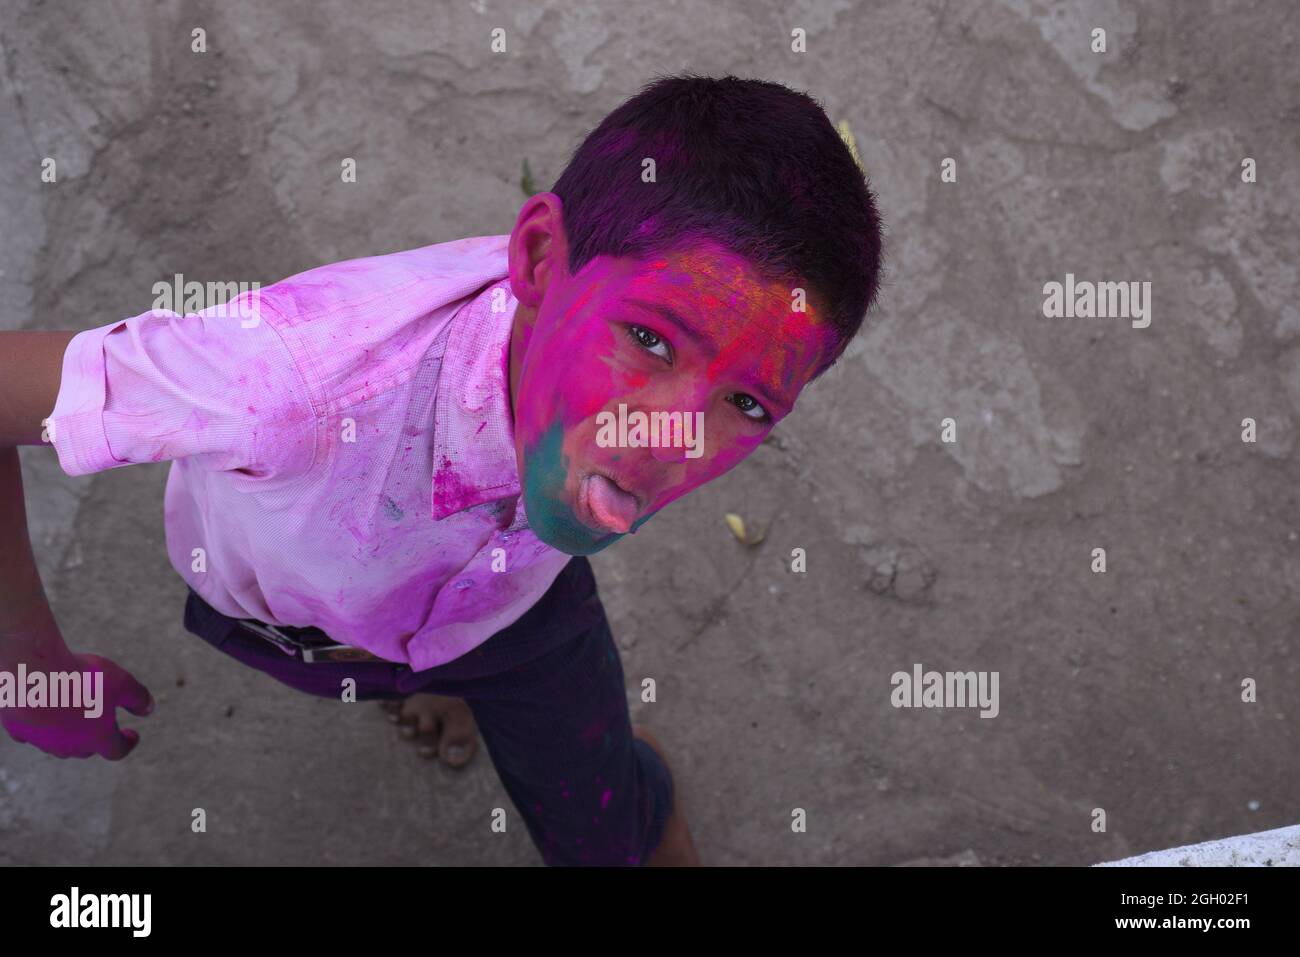 Boy playing with colors, In a happy mood. Concept for Indian festival Holi Stock Photo